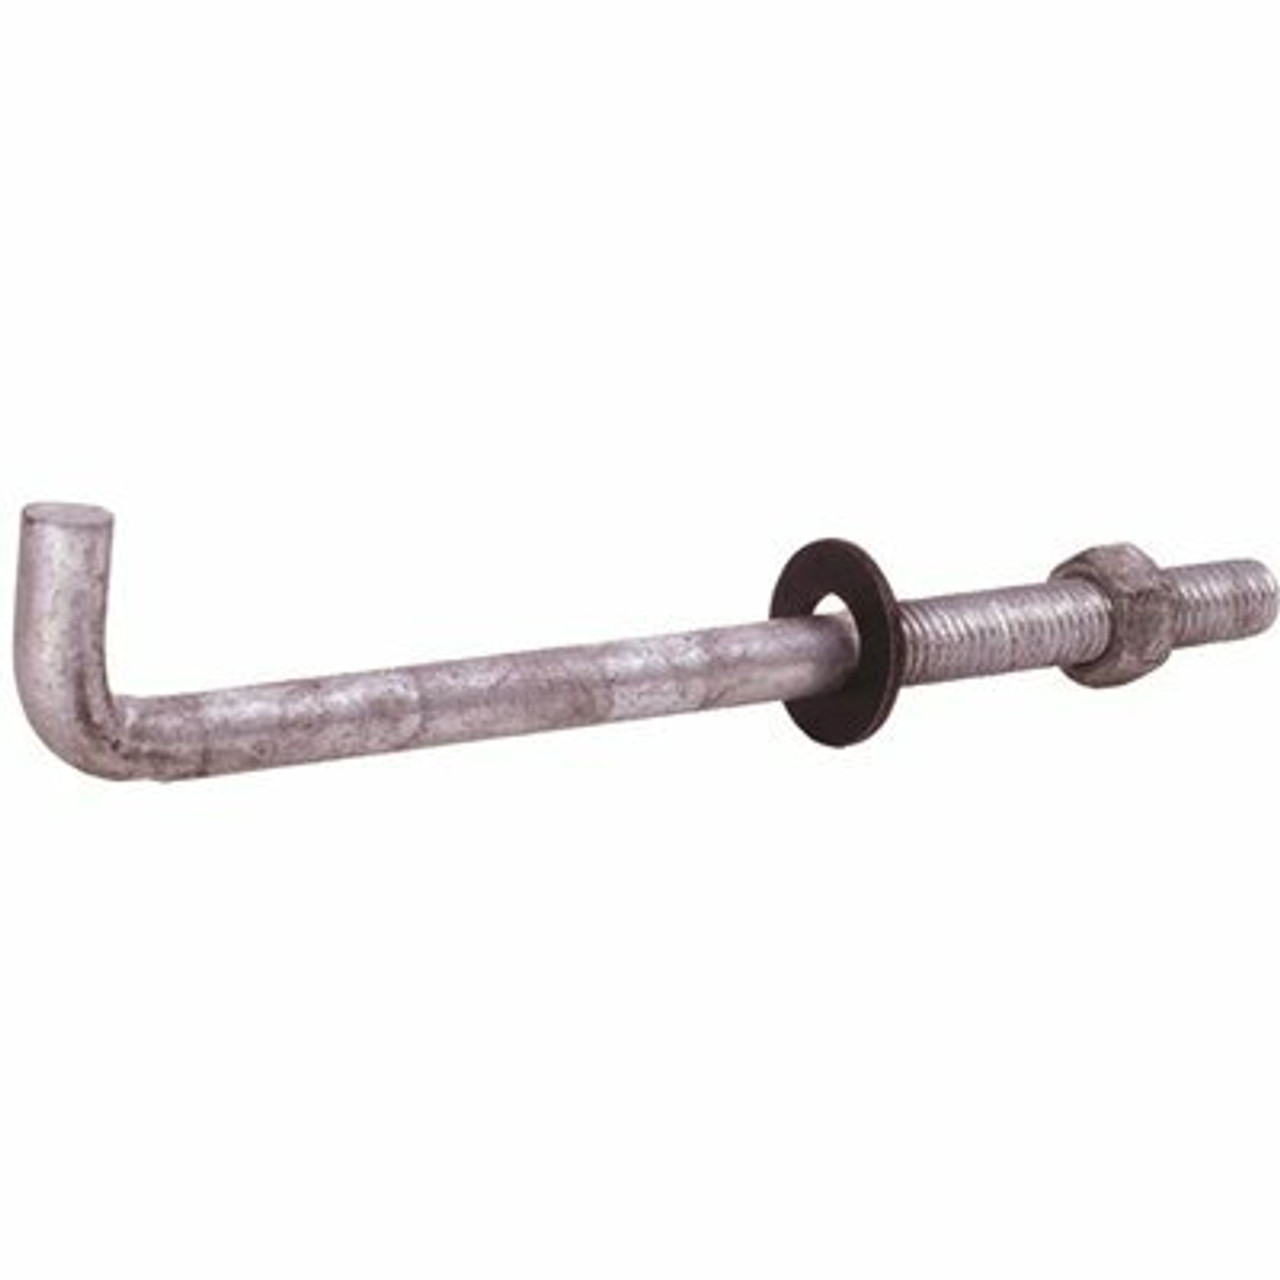 Grip-Rite 1/2 In. X 10 In. Galvanized Anchor Bolts (50-Pack)